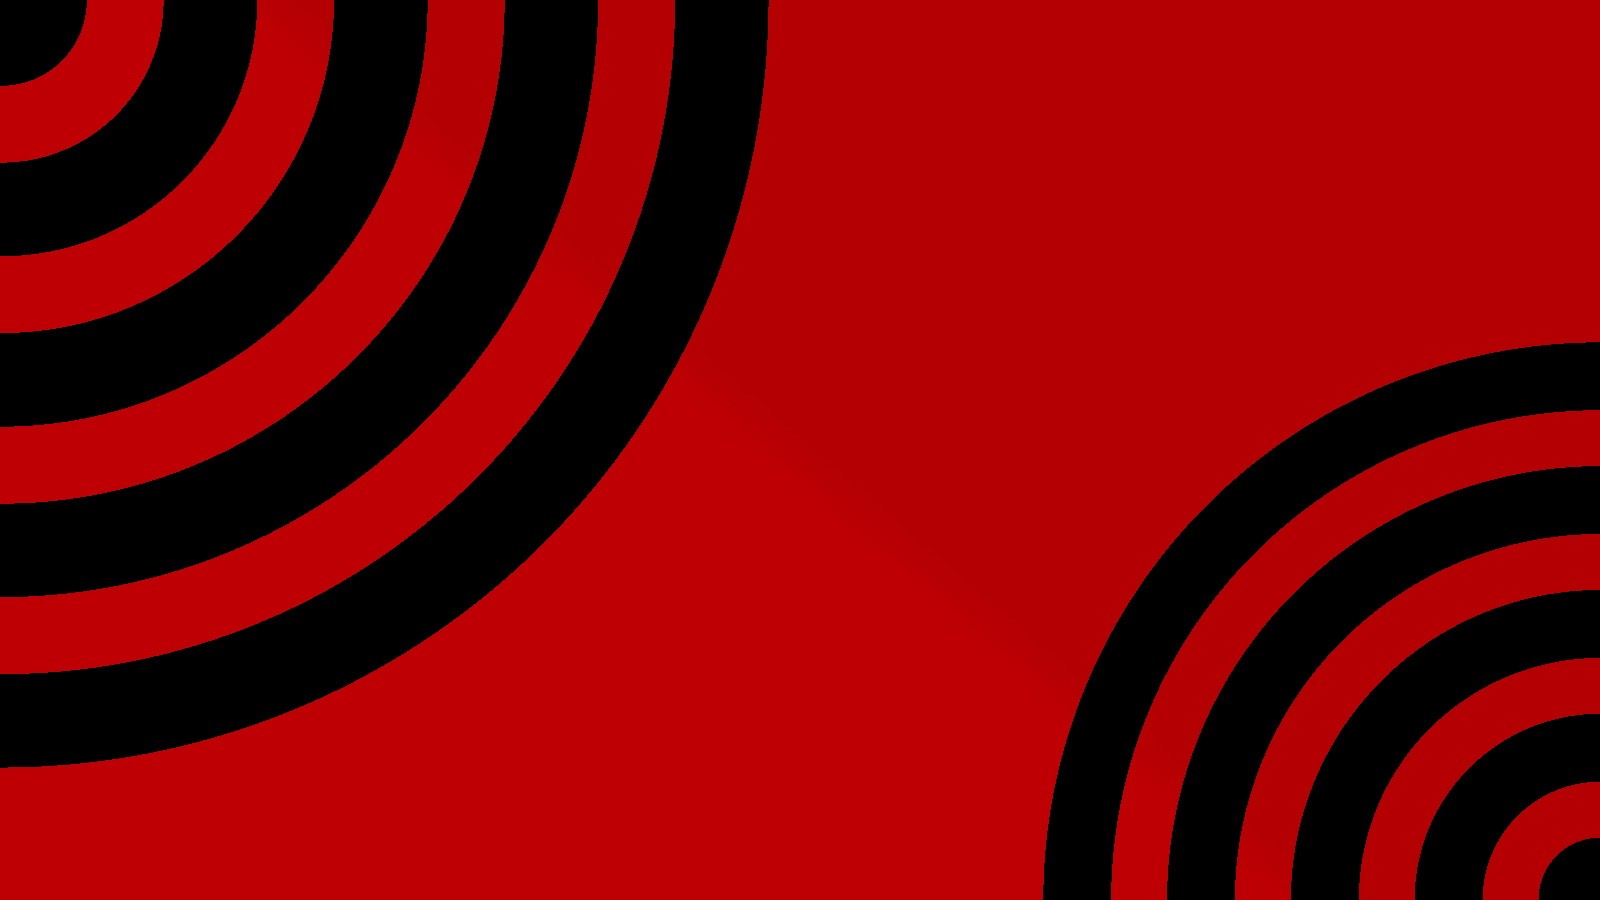 Simple Red Black Background - HD Wallpaper 